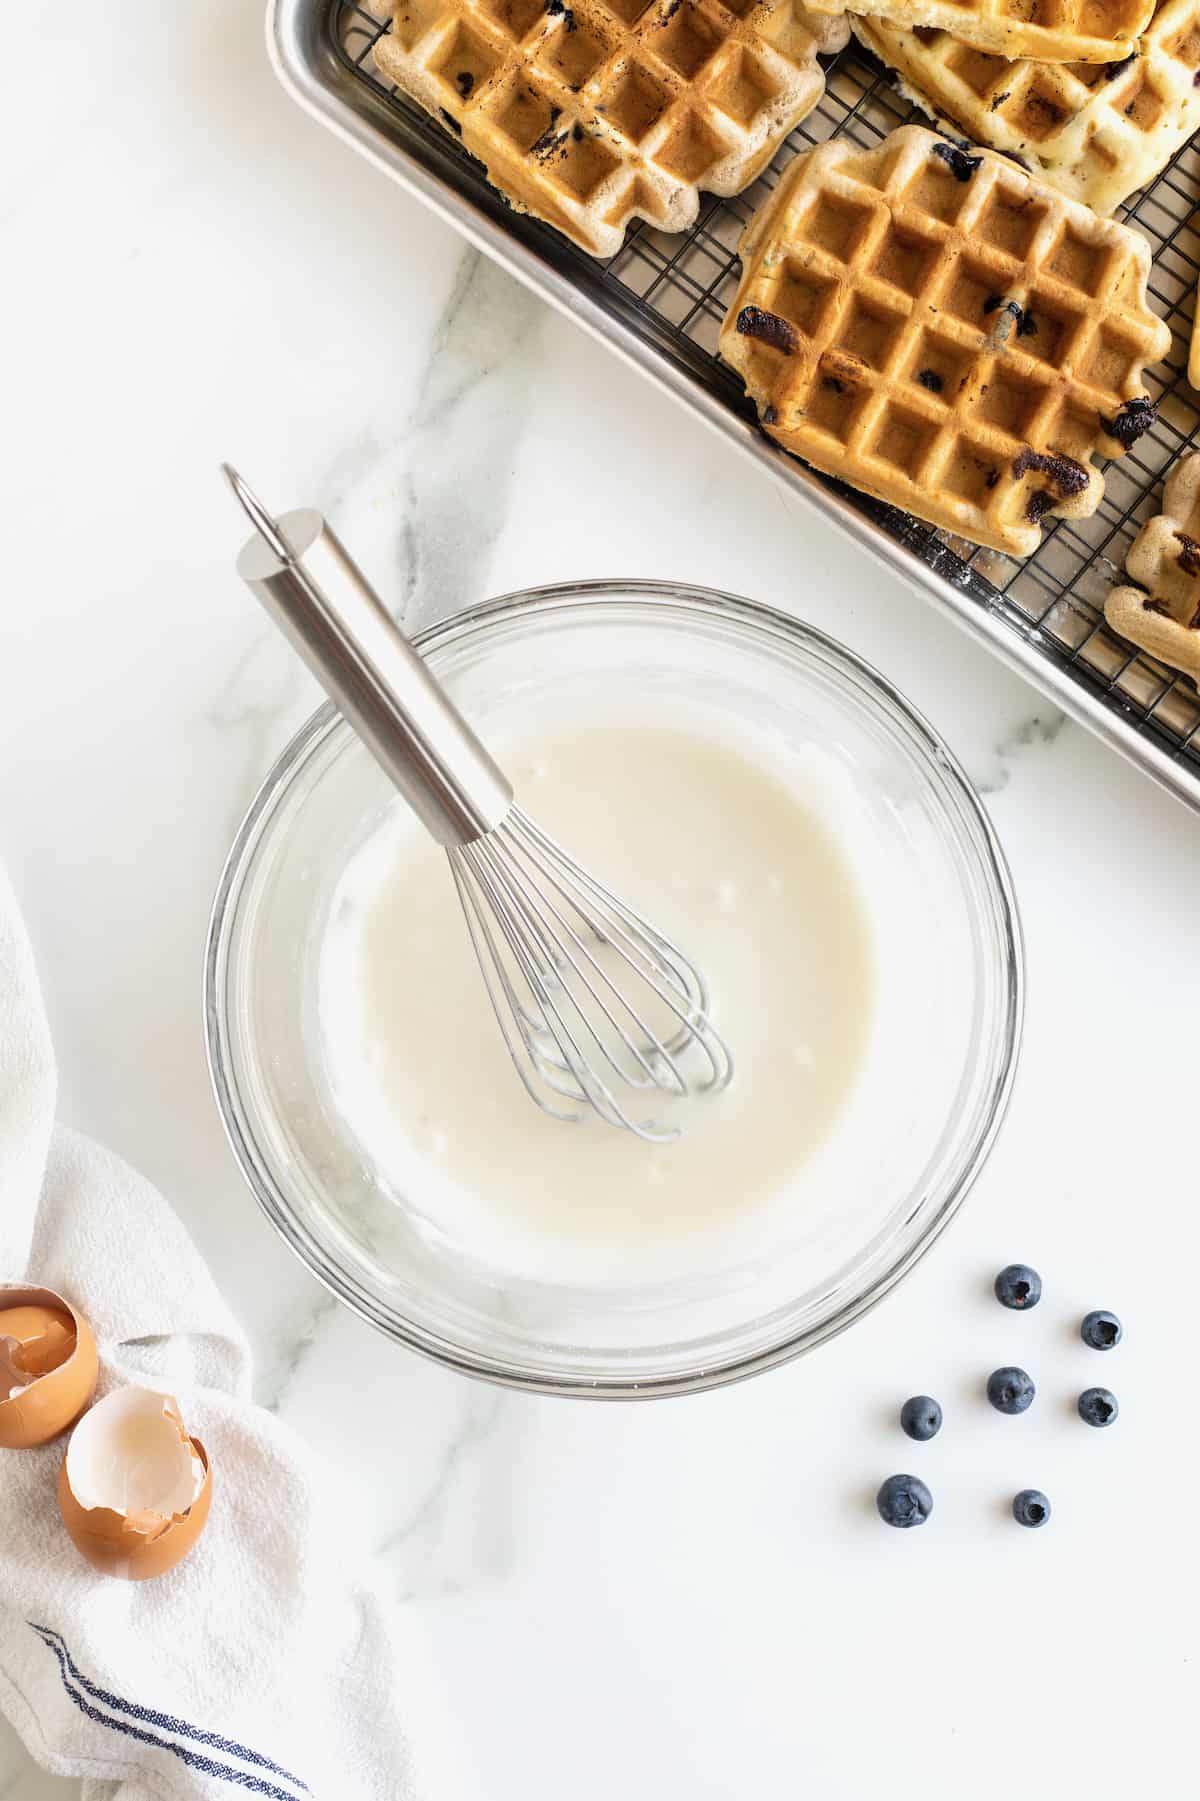 A metal whisk in a glass bowl of white glaze.